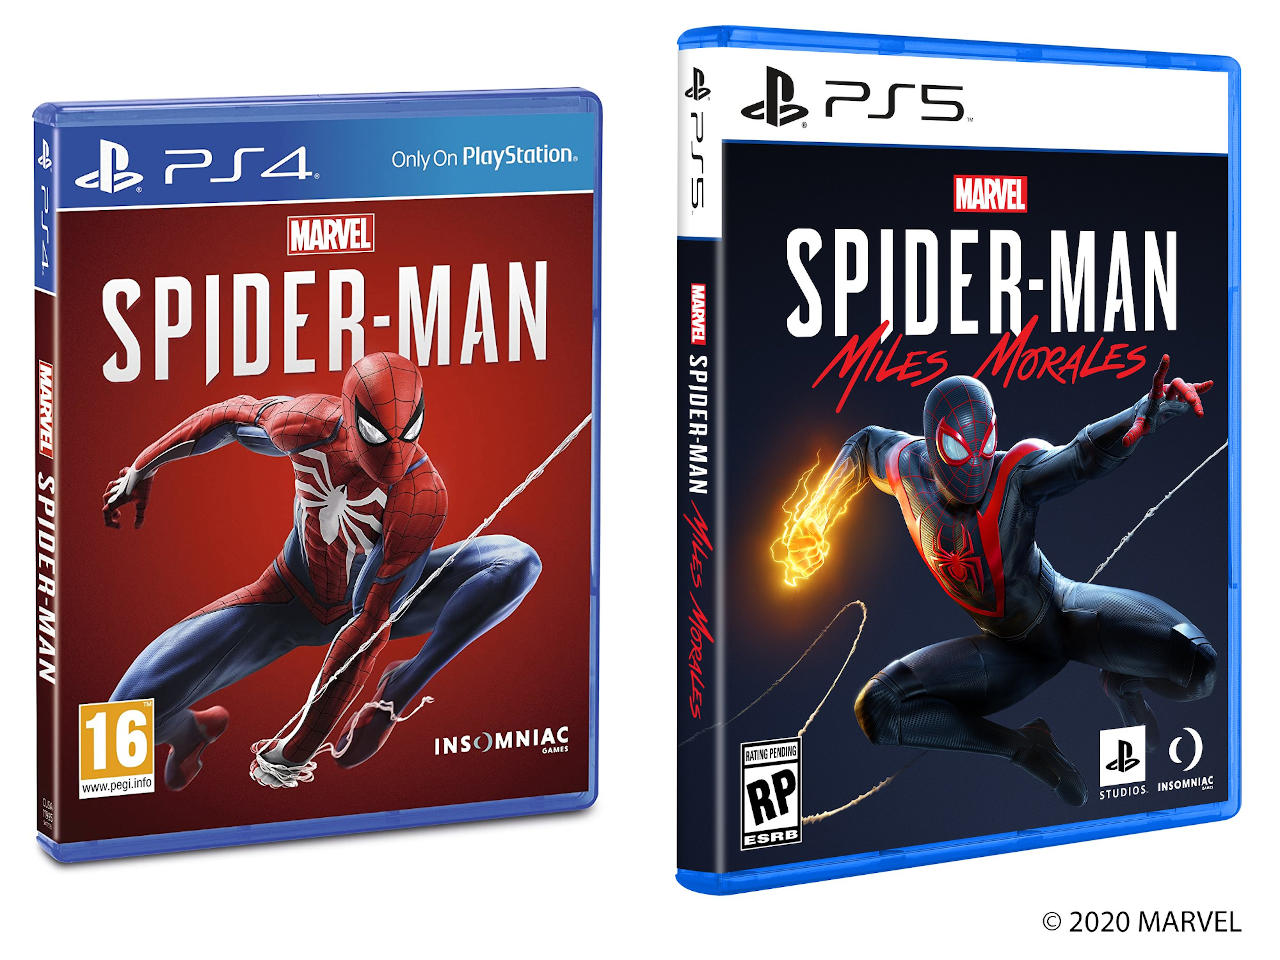 ps4 game boxes